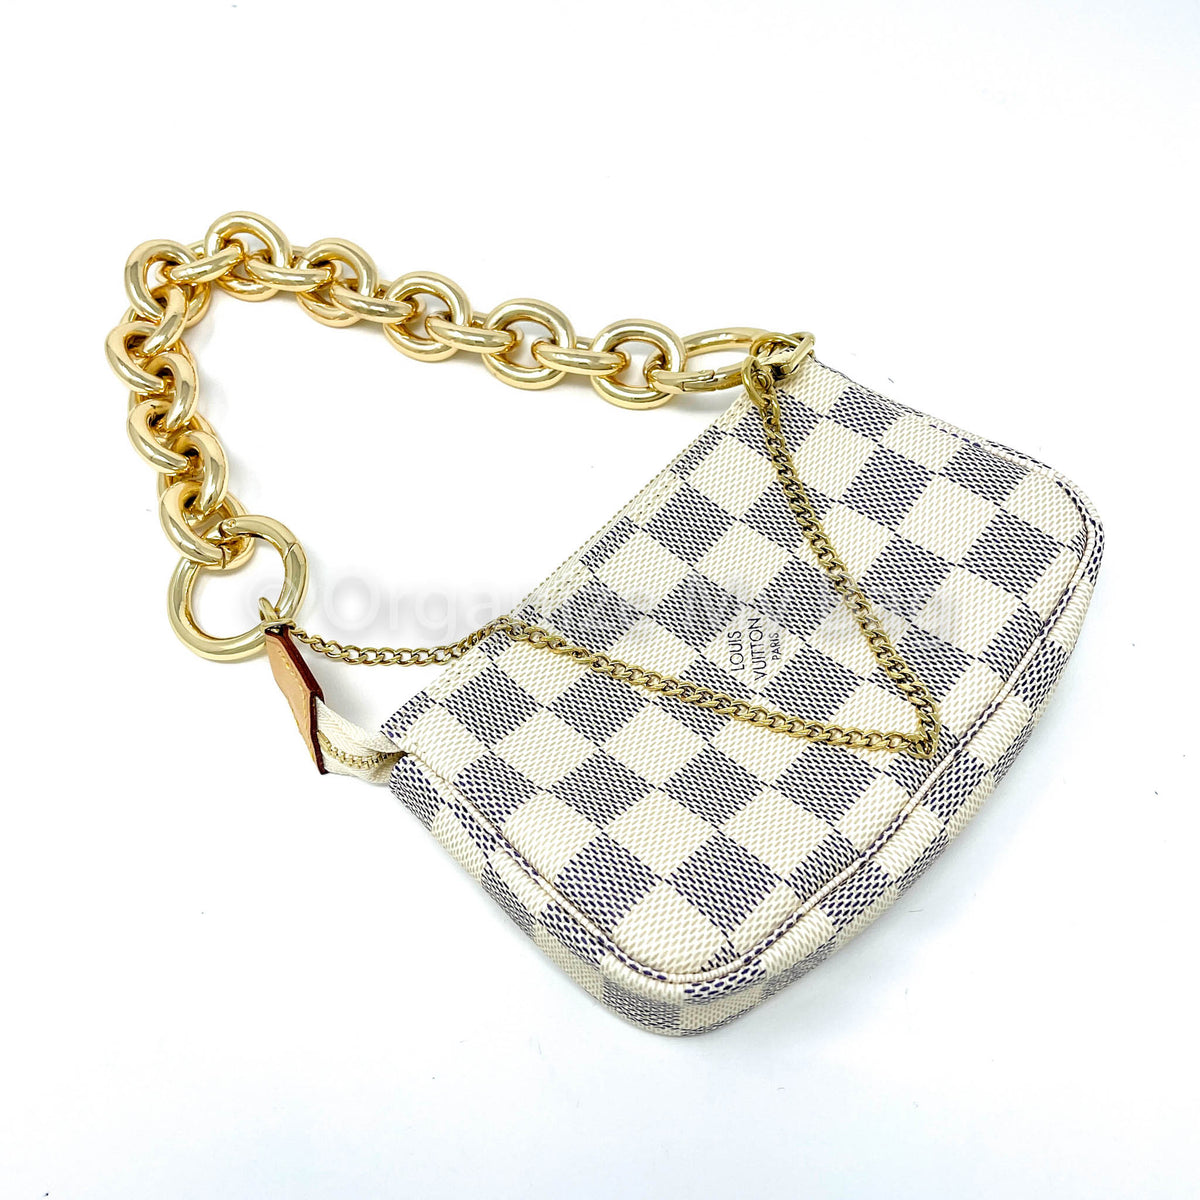 Unboxing & First Impression of 2023 Louis Vuitton Mini Pochette on Chain 